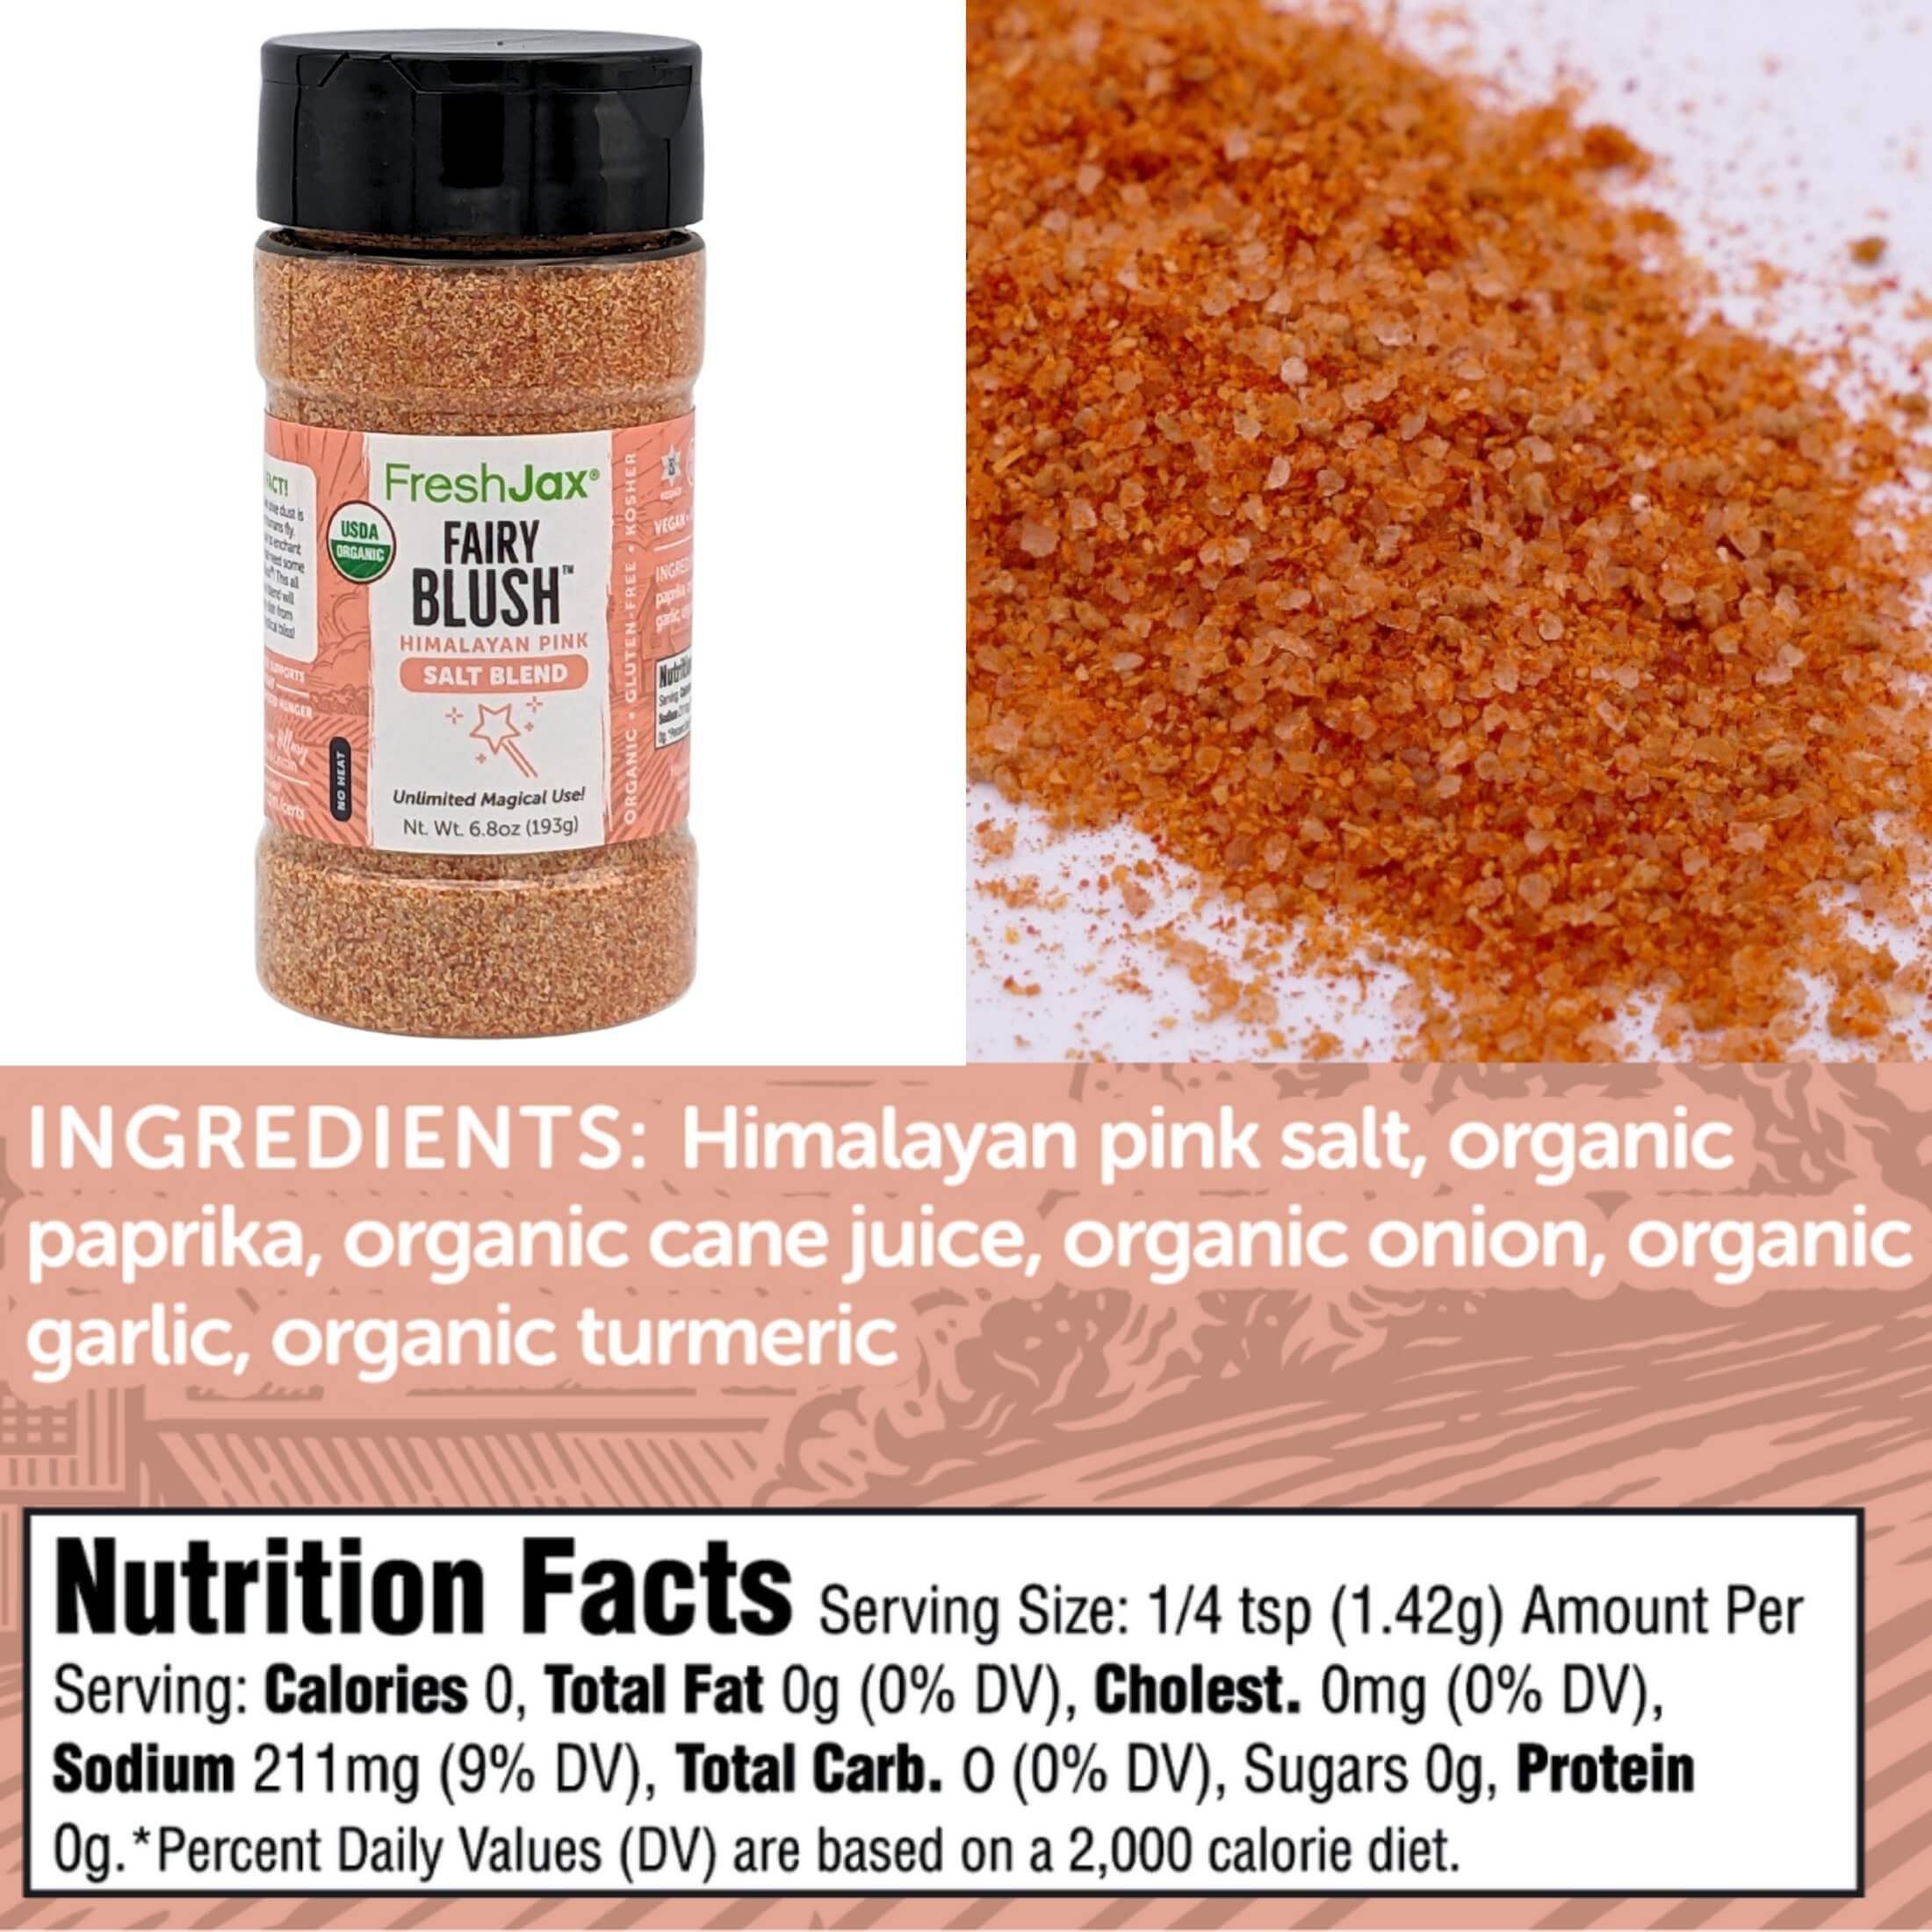 FreshJax Organic Spices Fairy Blush Himalayan Pink Salt Blend Ingredients and Nutritional Information